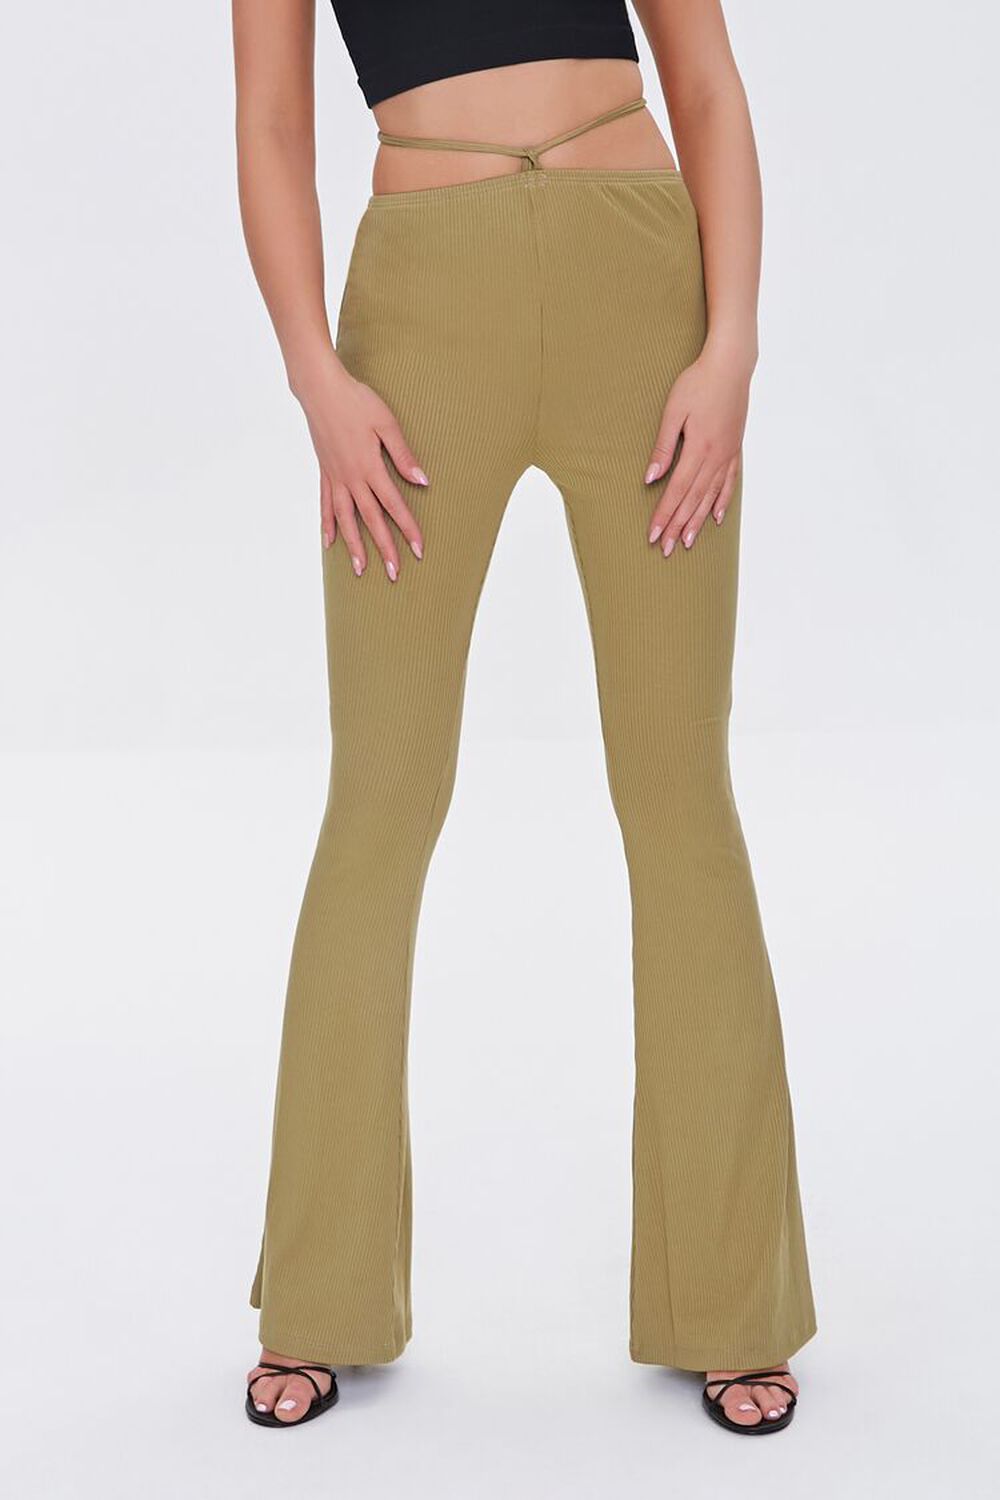 OLIVE Ribbed Knit Self-Tie Flare Pants, image 2